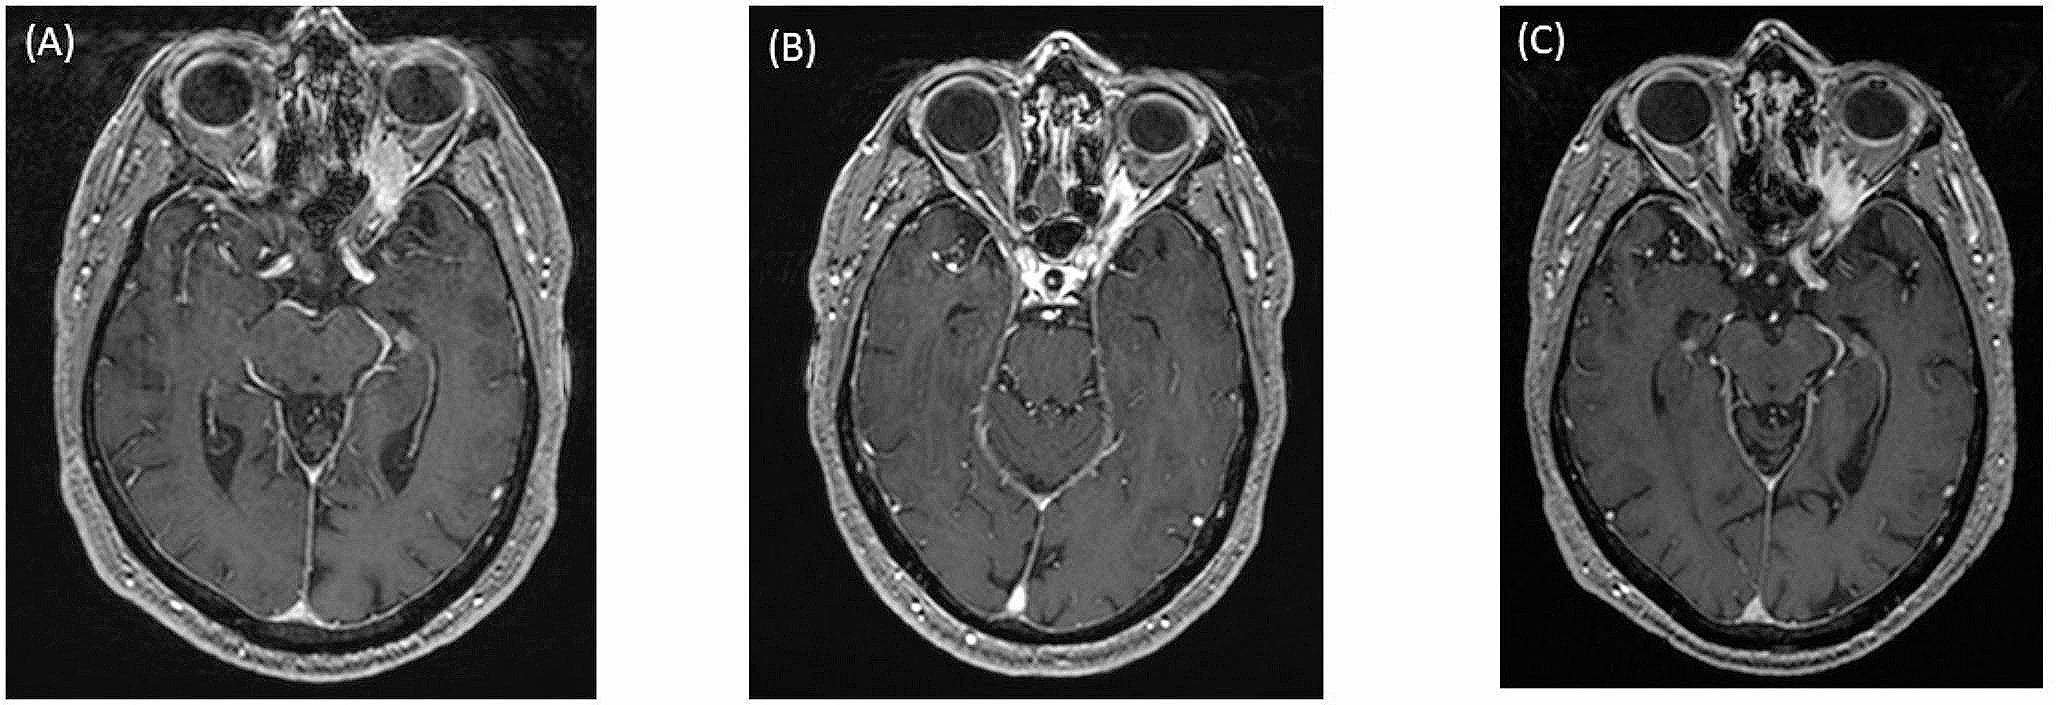 Stereotactic radiosurgery for intracranial adenoid cystic carcinoma